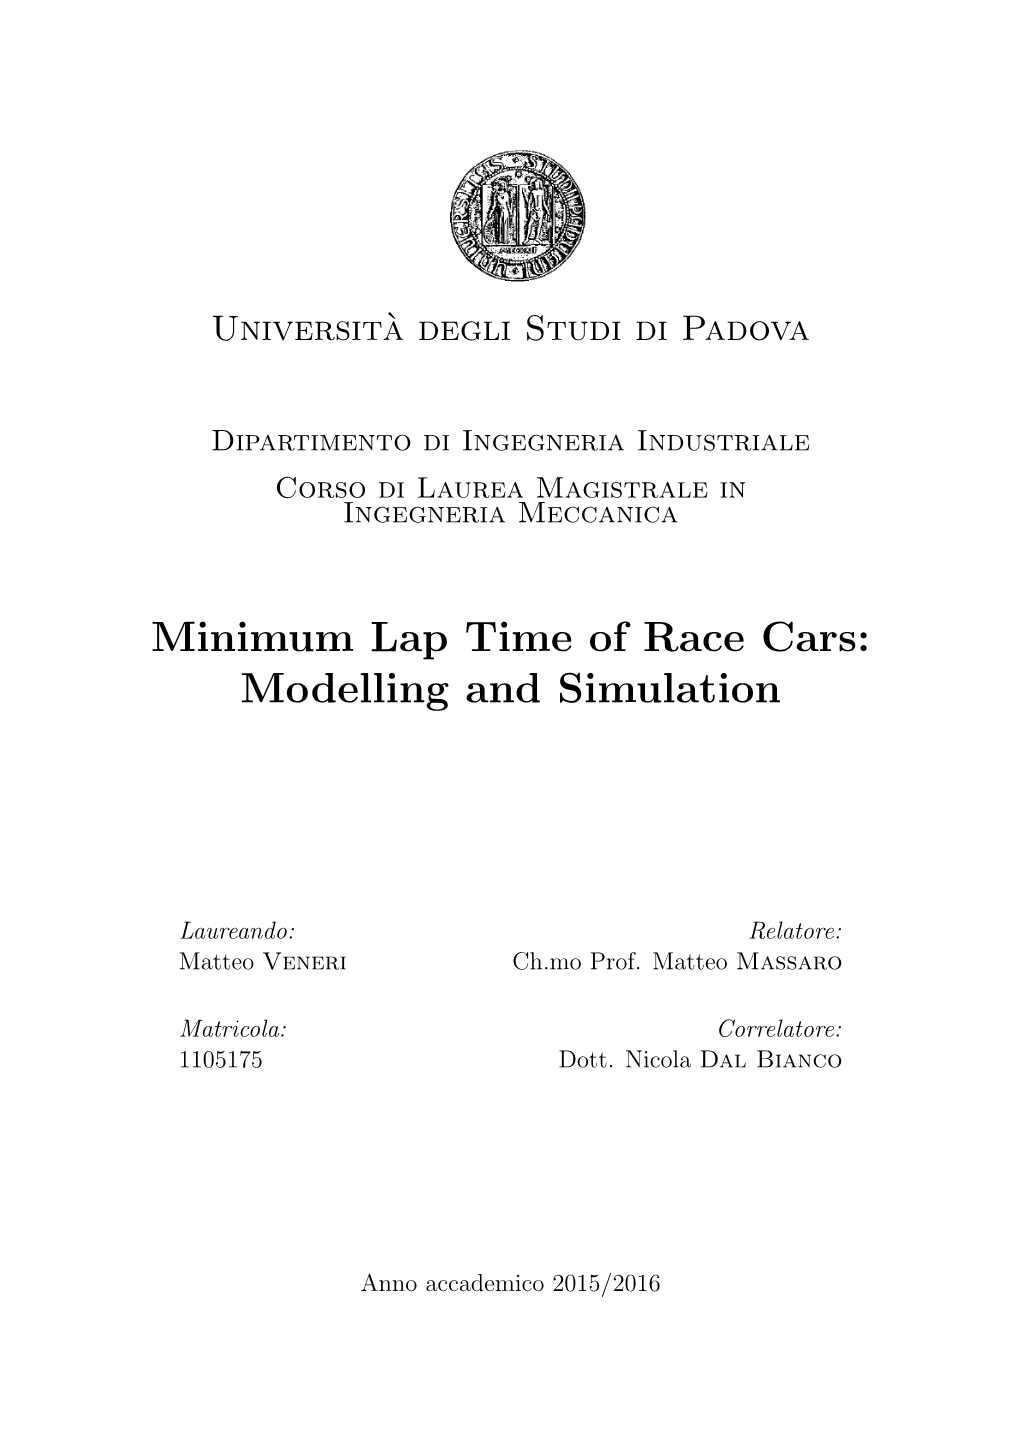 Minimum Lap Time of Race Cars: Modelling and Simulation